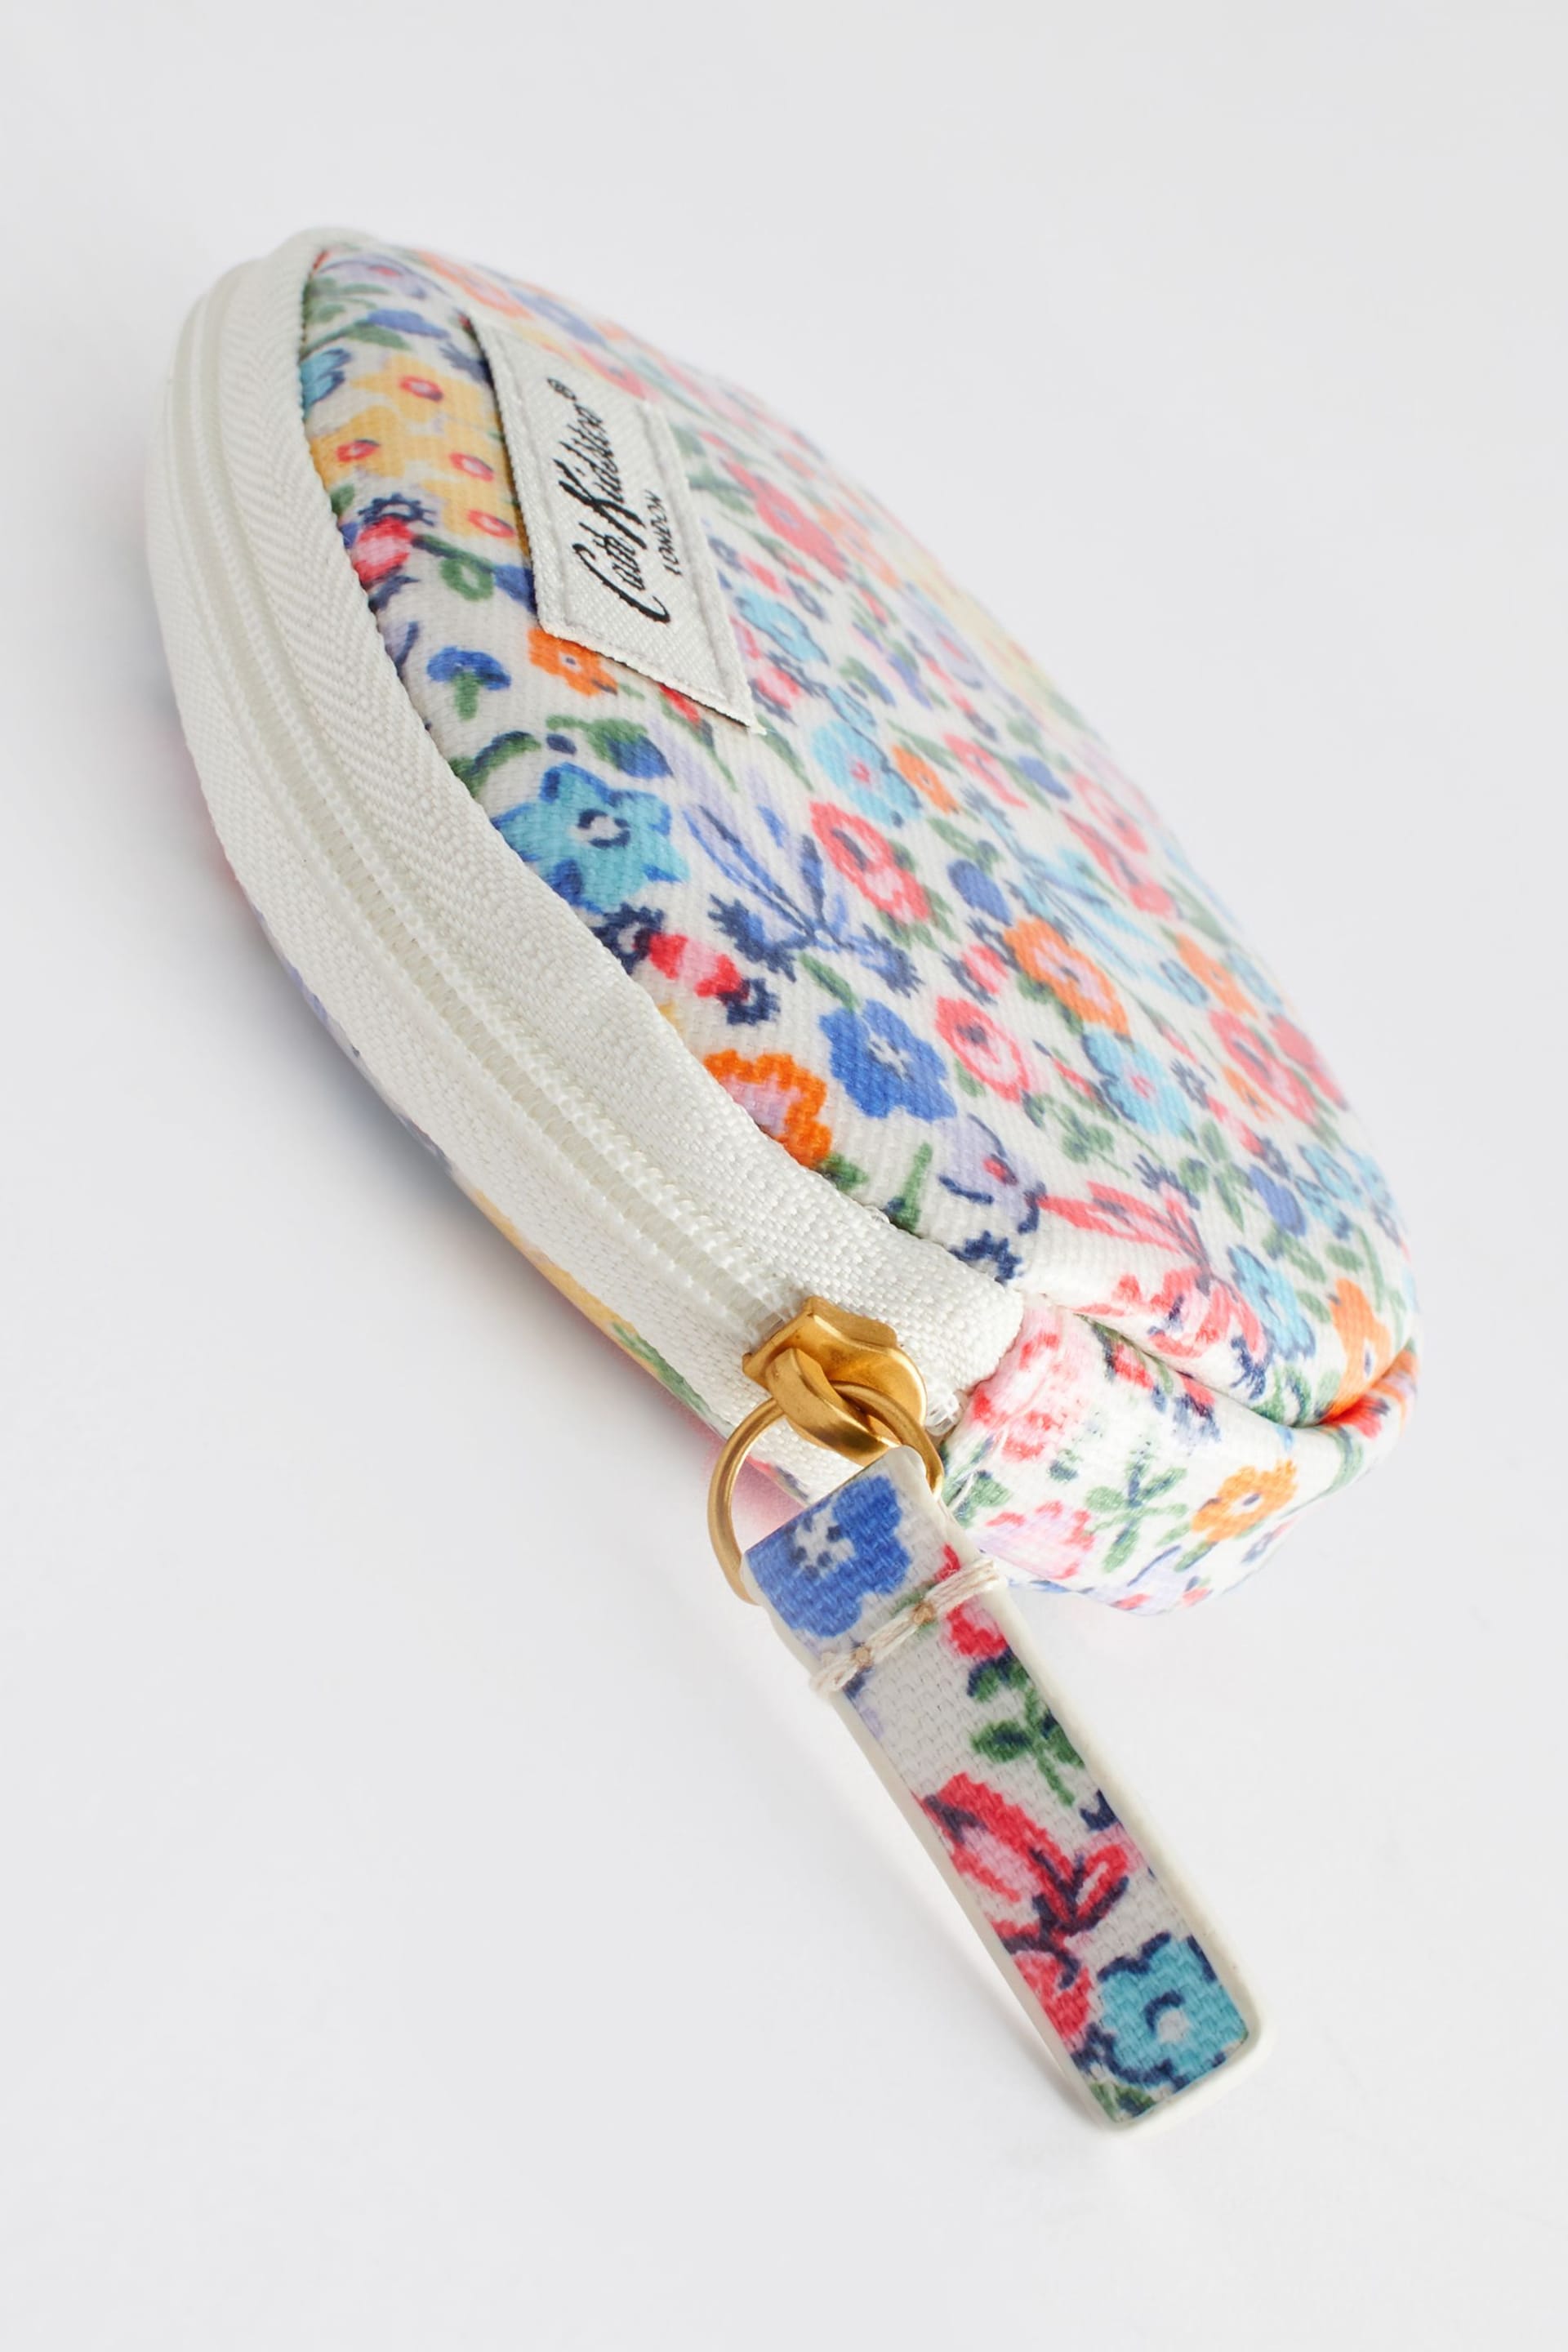 Cath Kidston Blue/Yellow Ditsy Floral Round Pocket Purse - Image 4 of 4